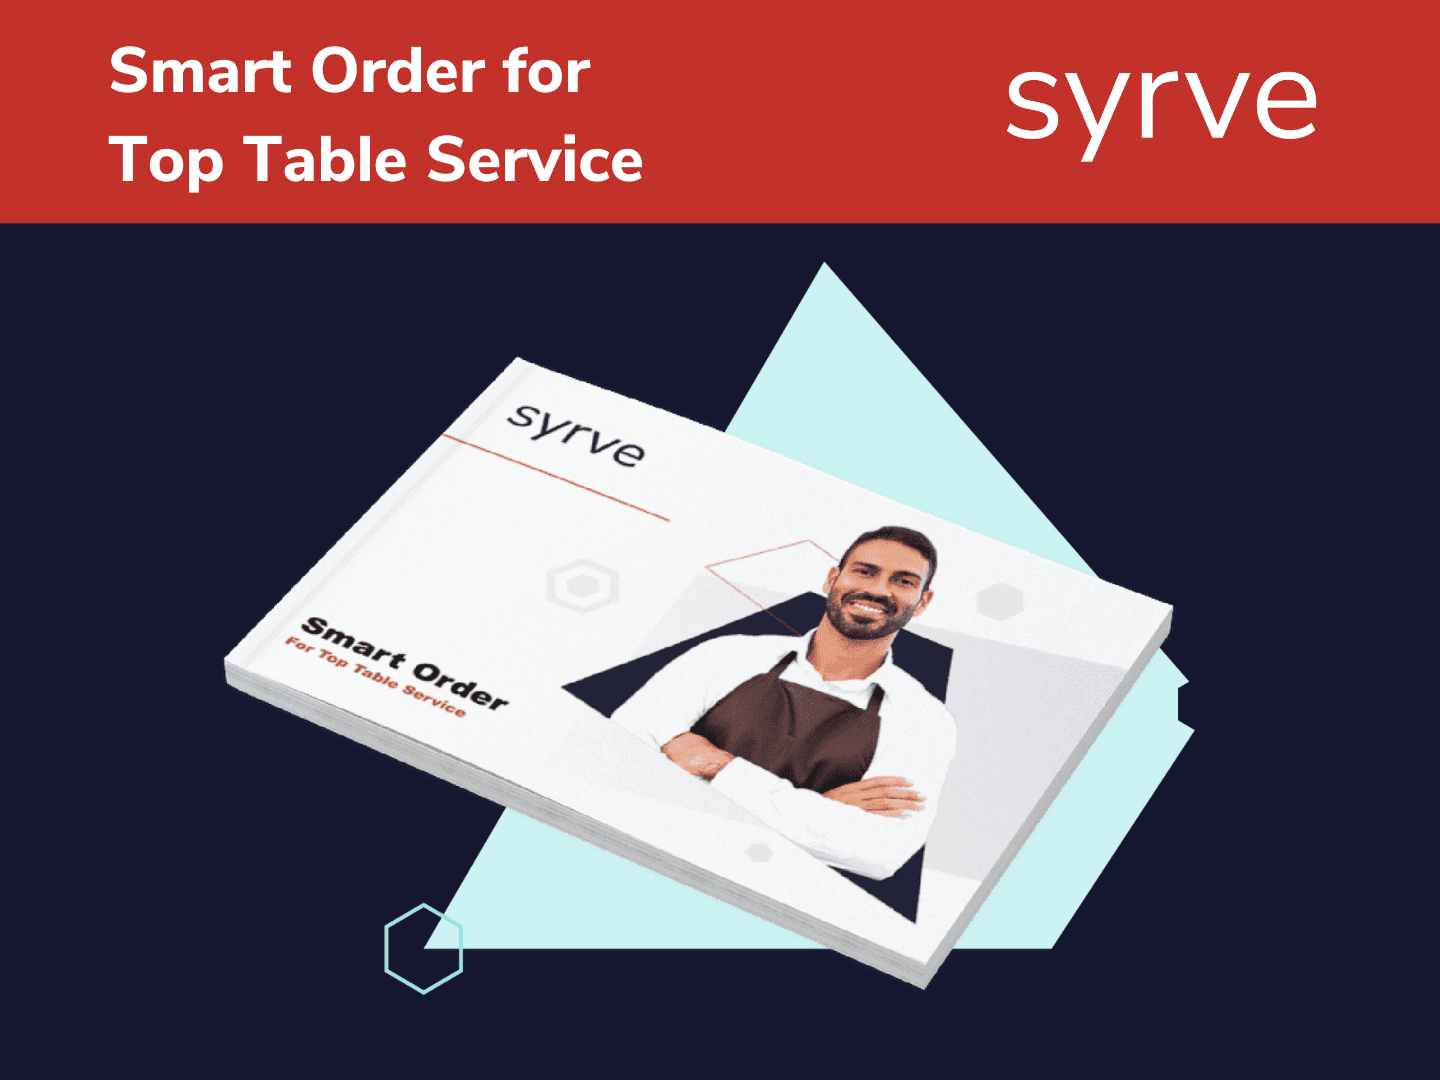 Smart Order for Top Table Service